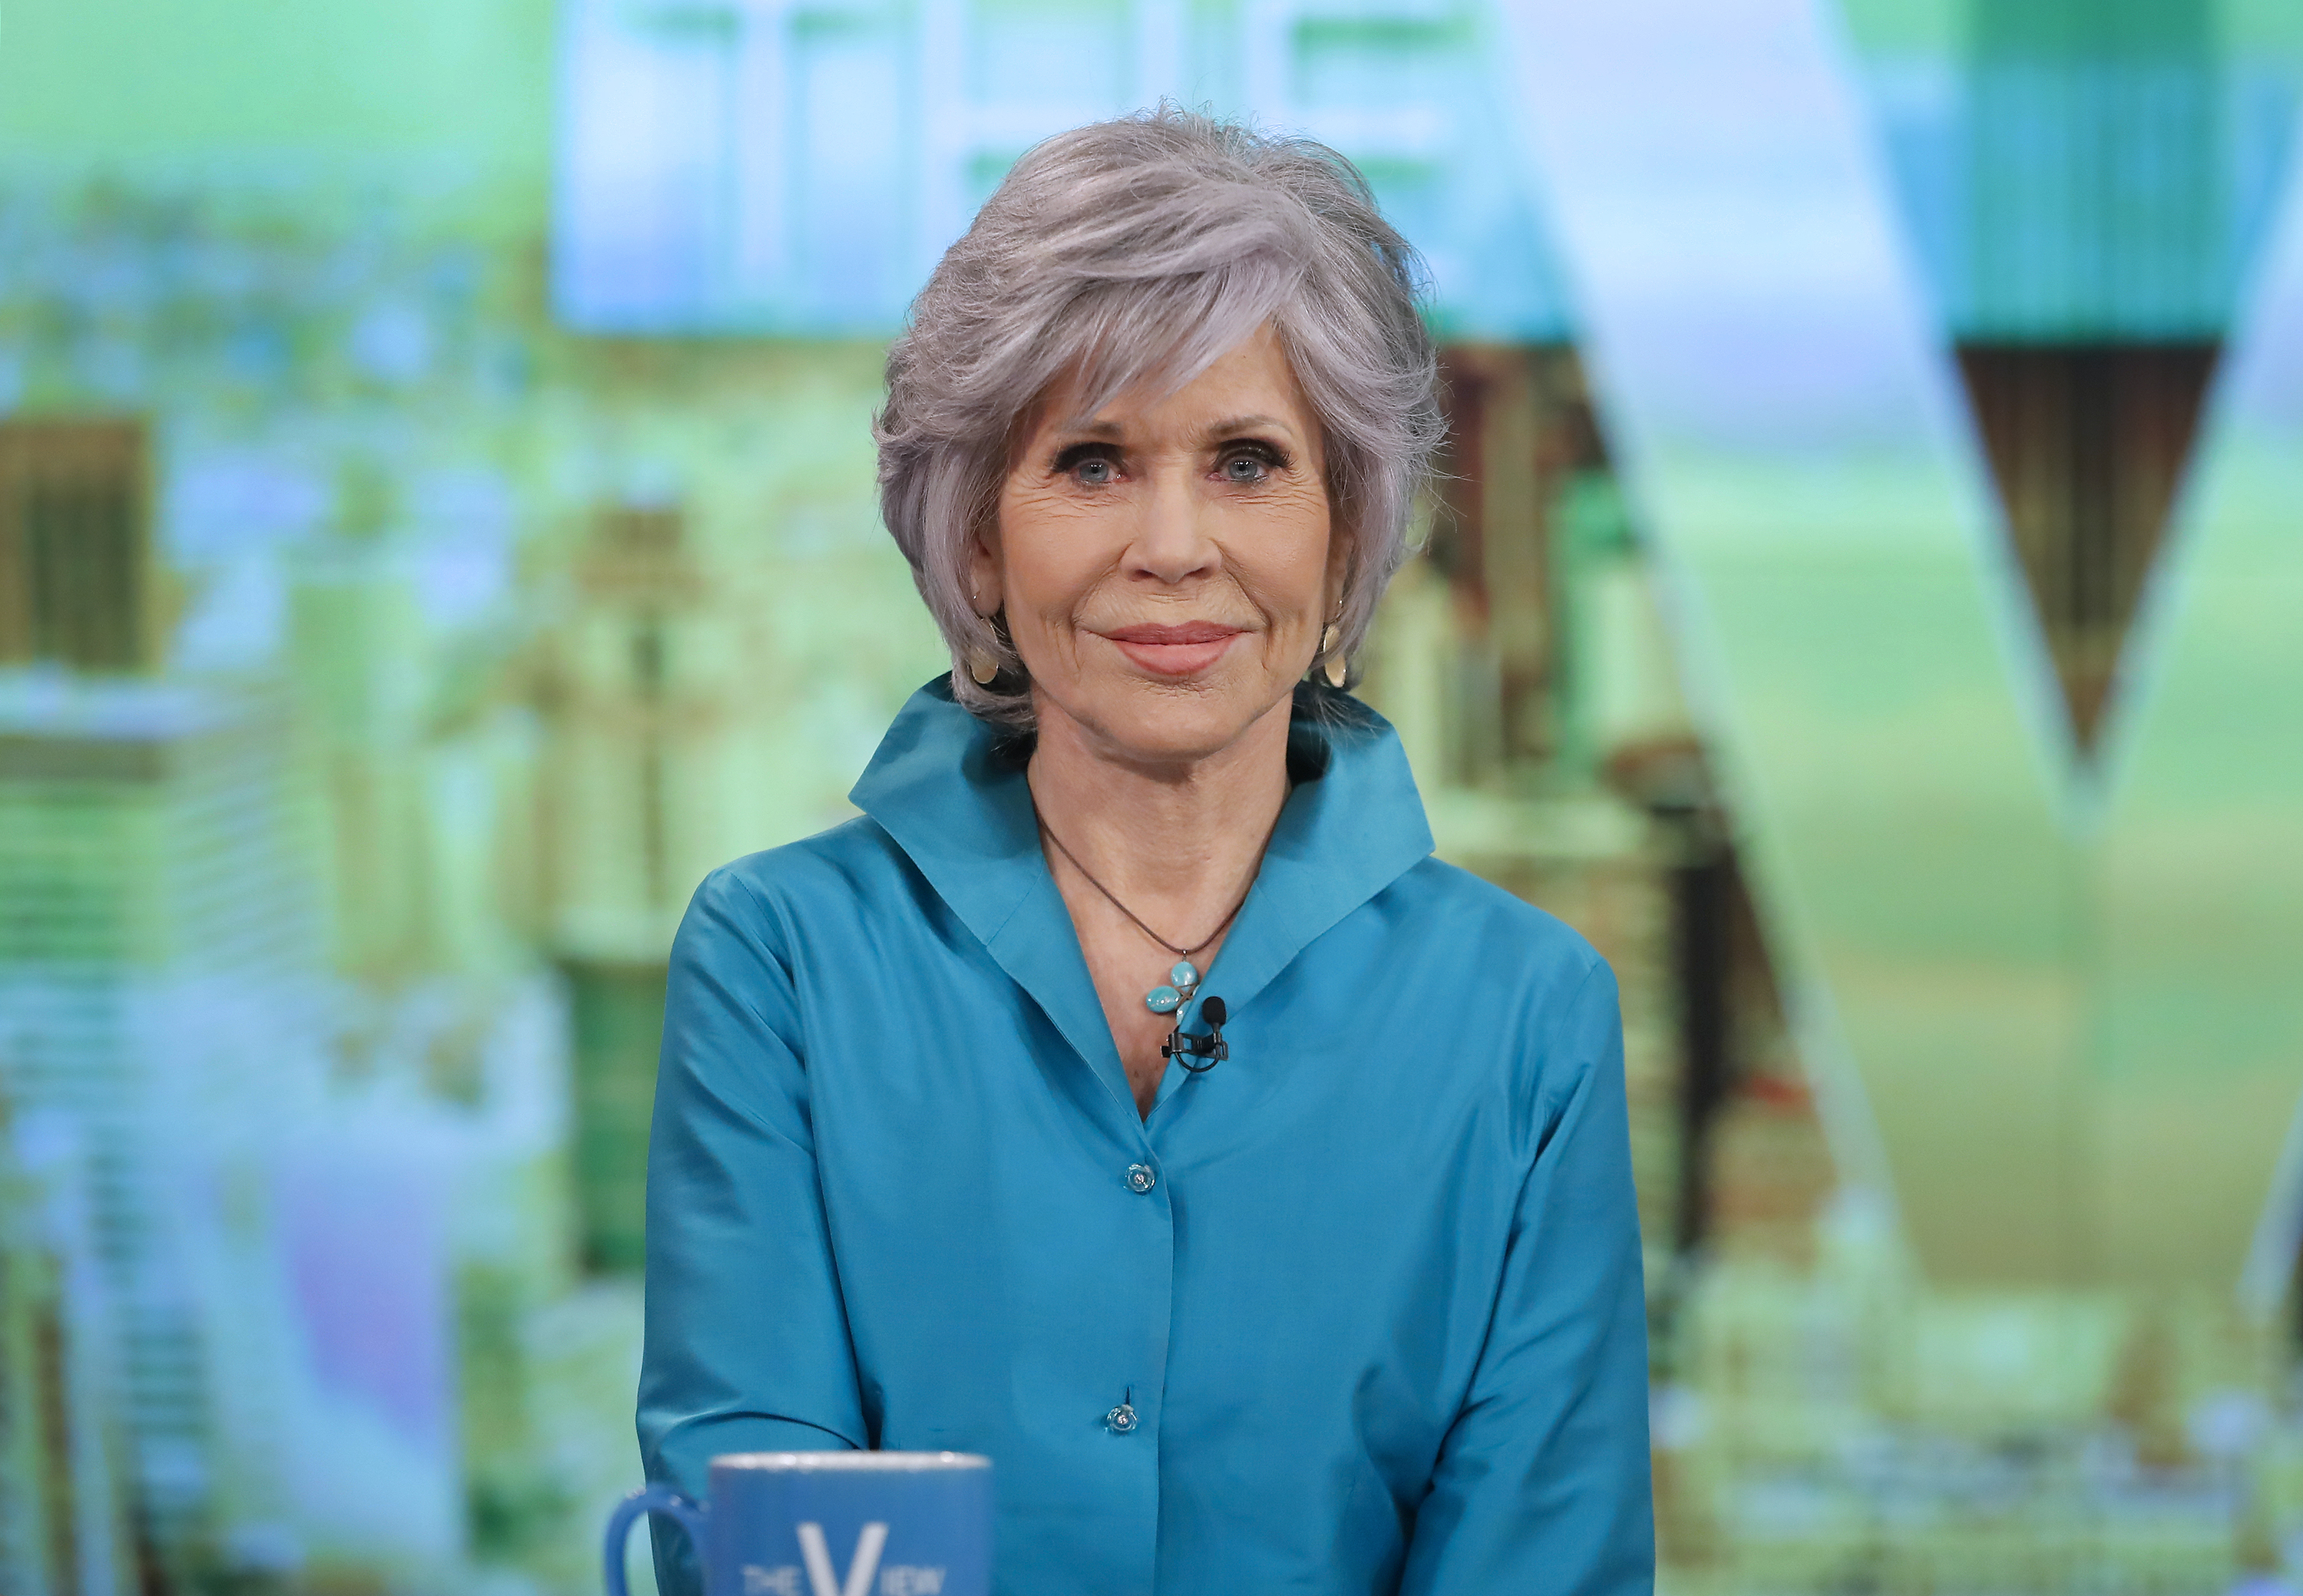 Jane Fonda appears on "The View" on March 10, 2023 | Source: Getty Images